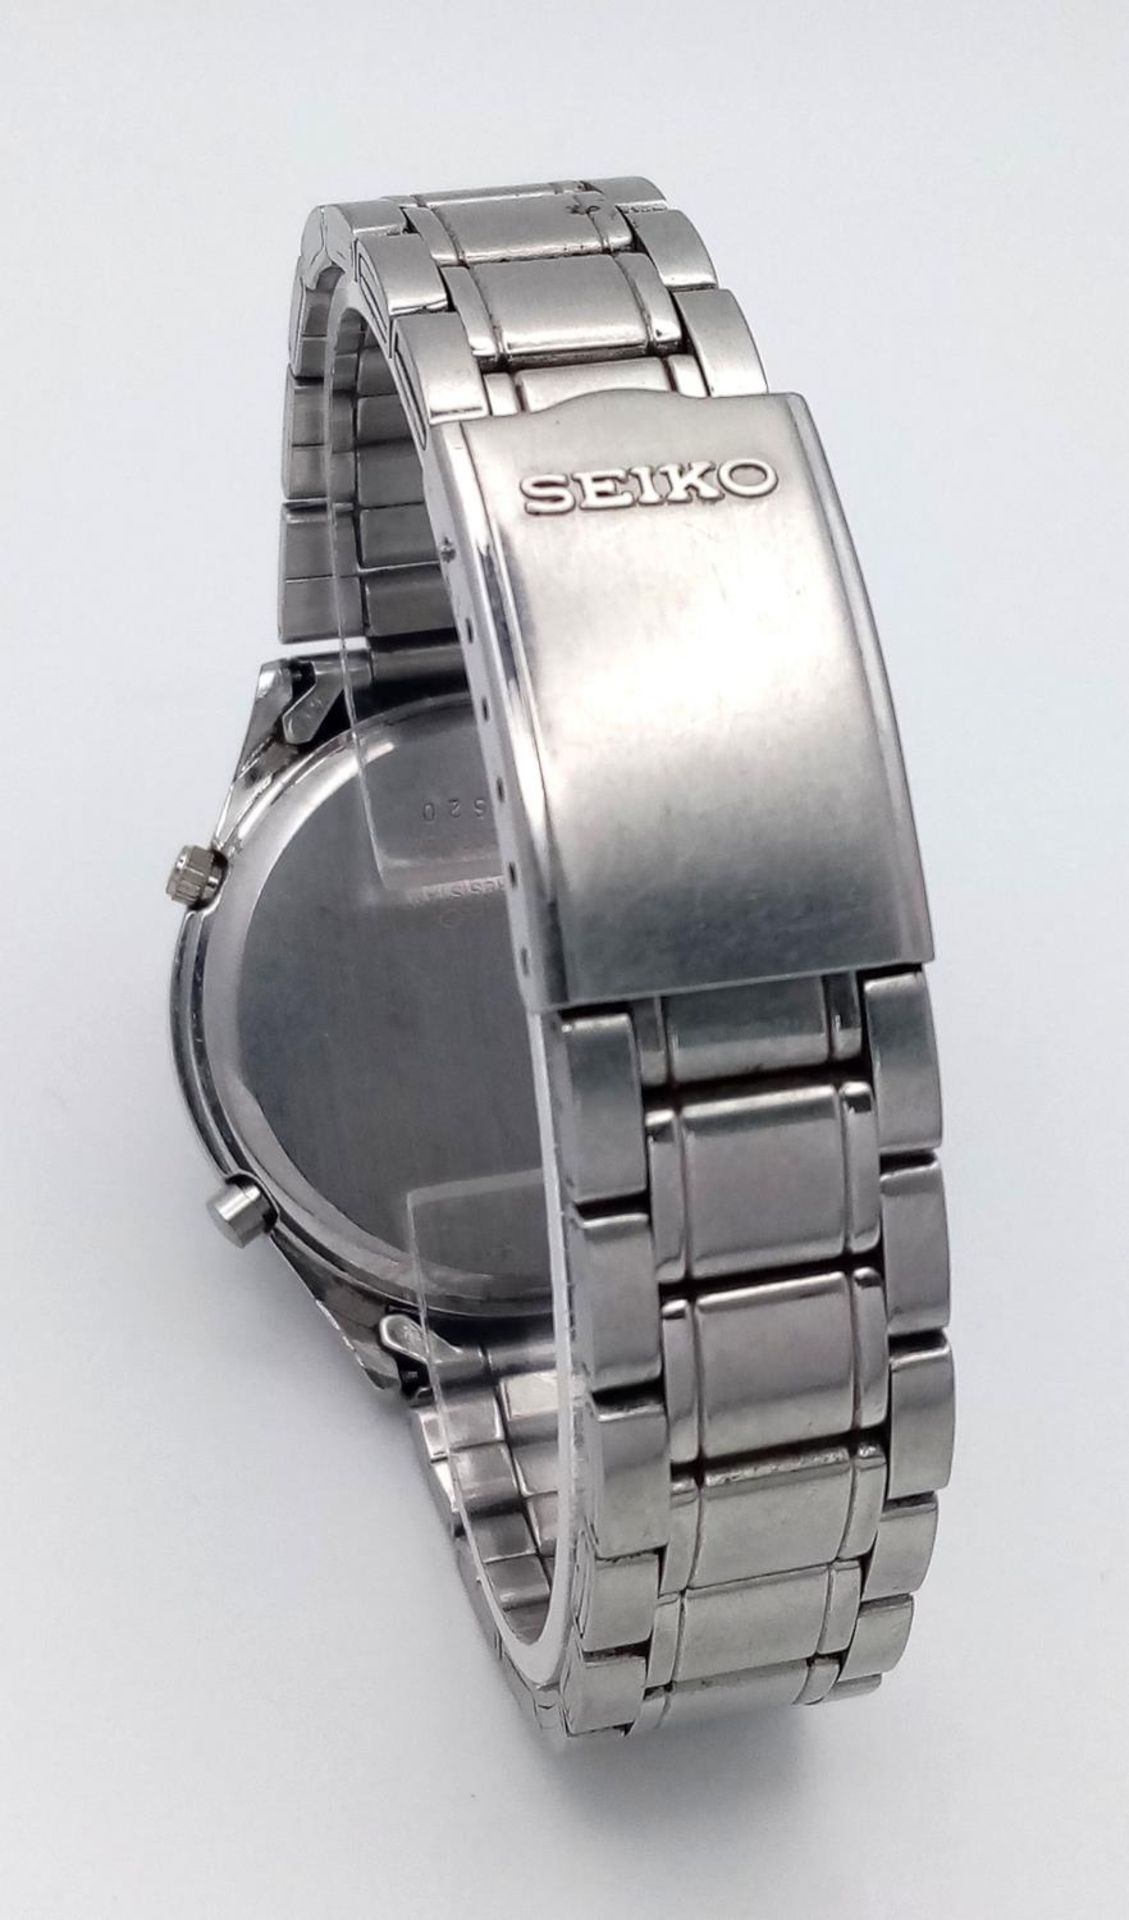 A Seiko Chronograph Quartz Alarm Gents Watch. Stainless steel bracelet and case - 38mm. Black dial - Image 5 of 7